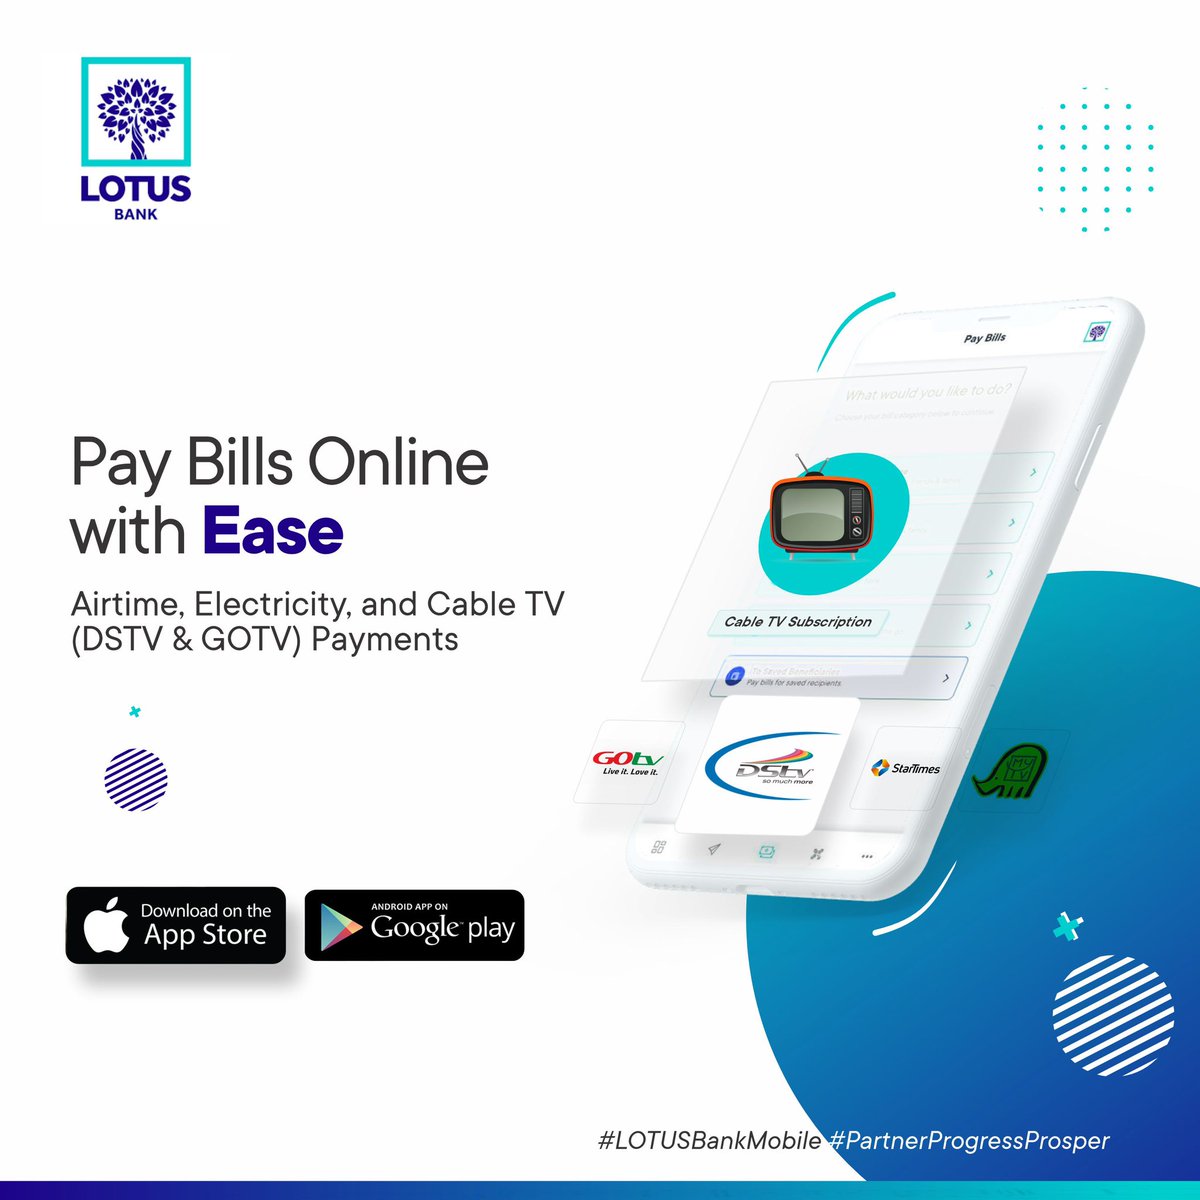 Never miss a payment again with LOTUS Bank’s mobile banking app and Internet banking platform. Pay your bills quickly and securely with just a few taps on your phone or clicks on your computer. #LOTUSBank #MobileBanking #InternetBanking #BillPaymentsMadeEasy #SecurePayments